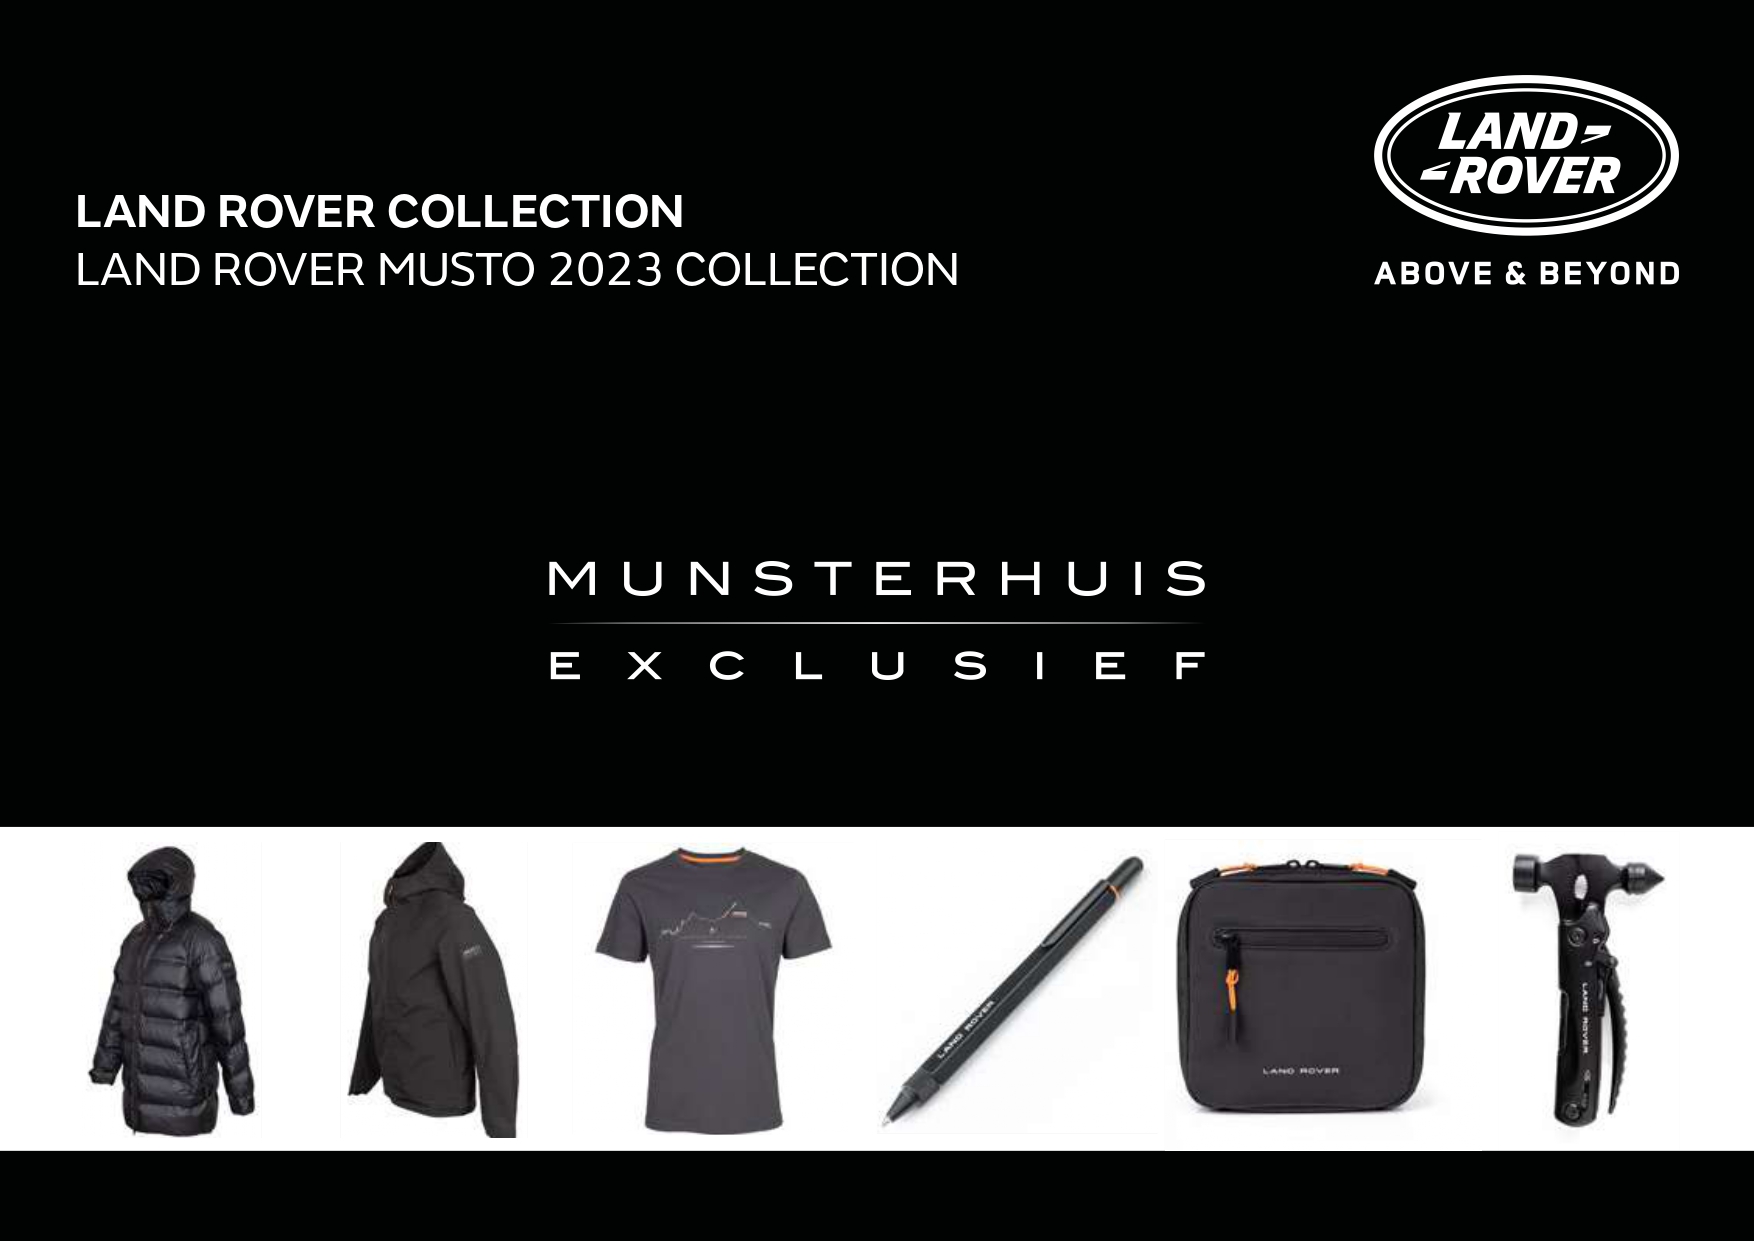 LAND ROVER MUSTO - Branded Goods